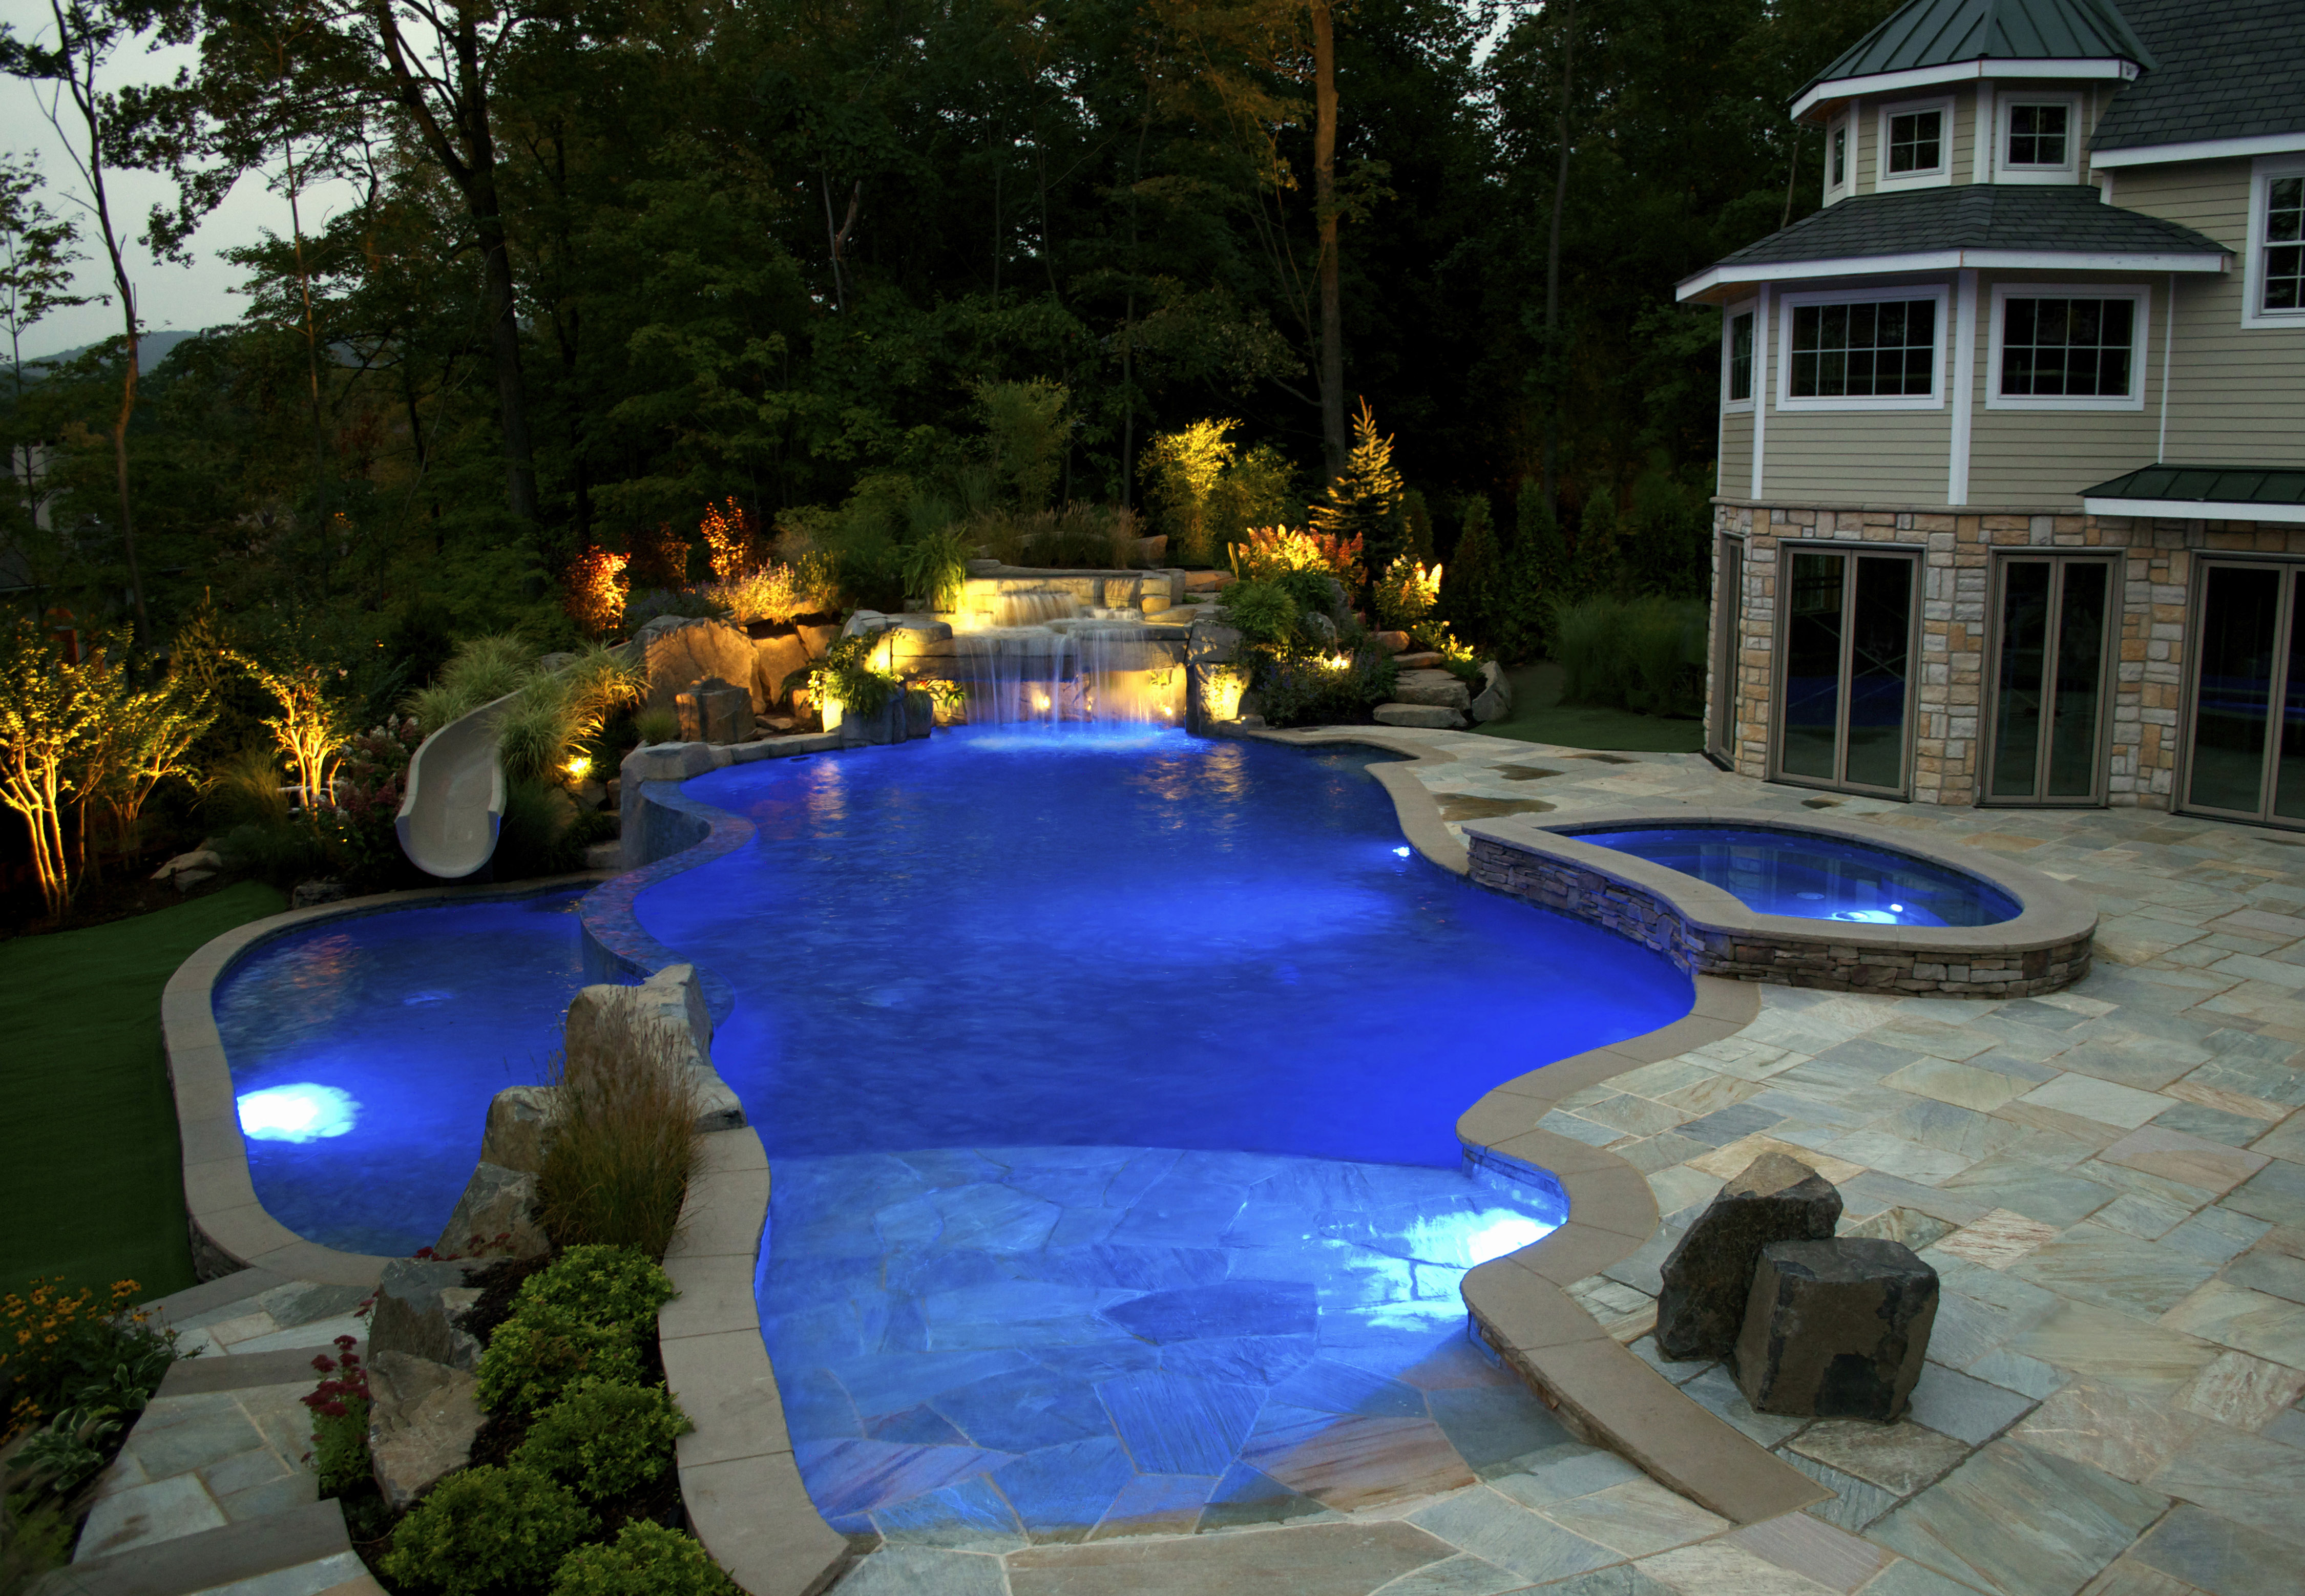 NJ Pool Company Debuts New Pool Features for Luxury ...